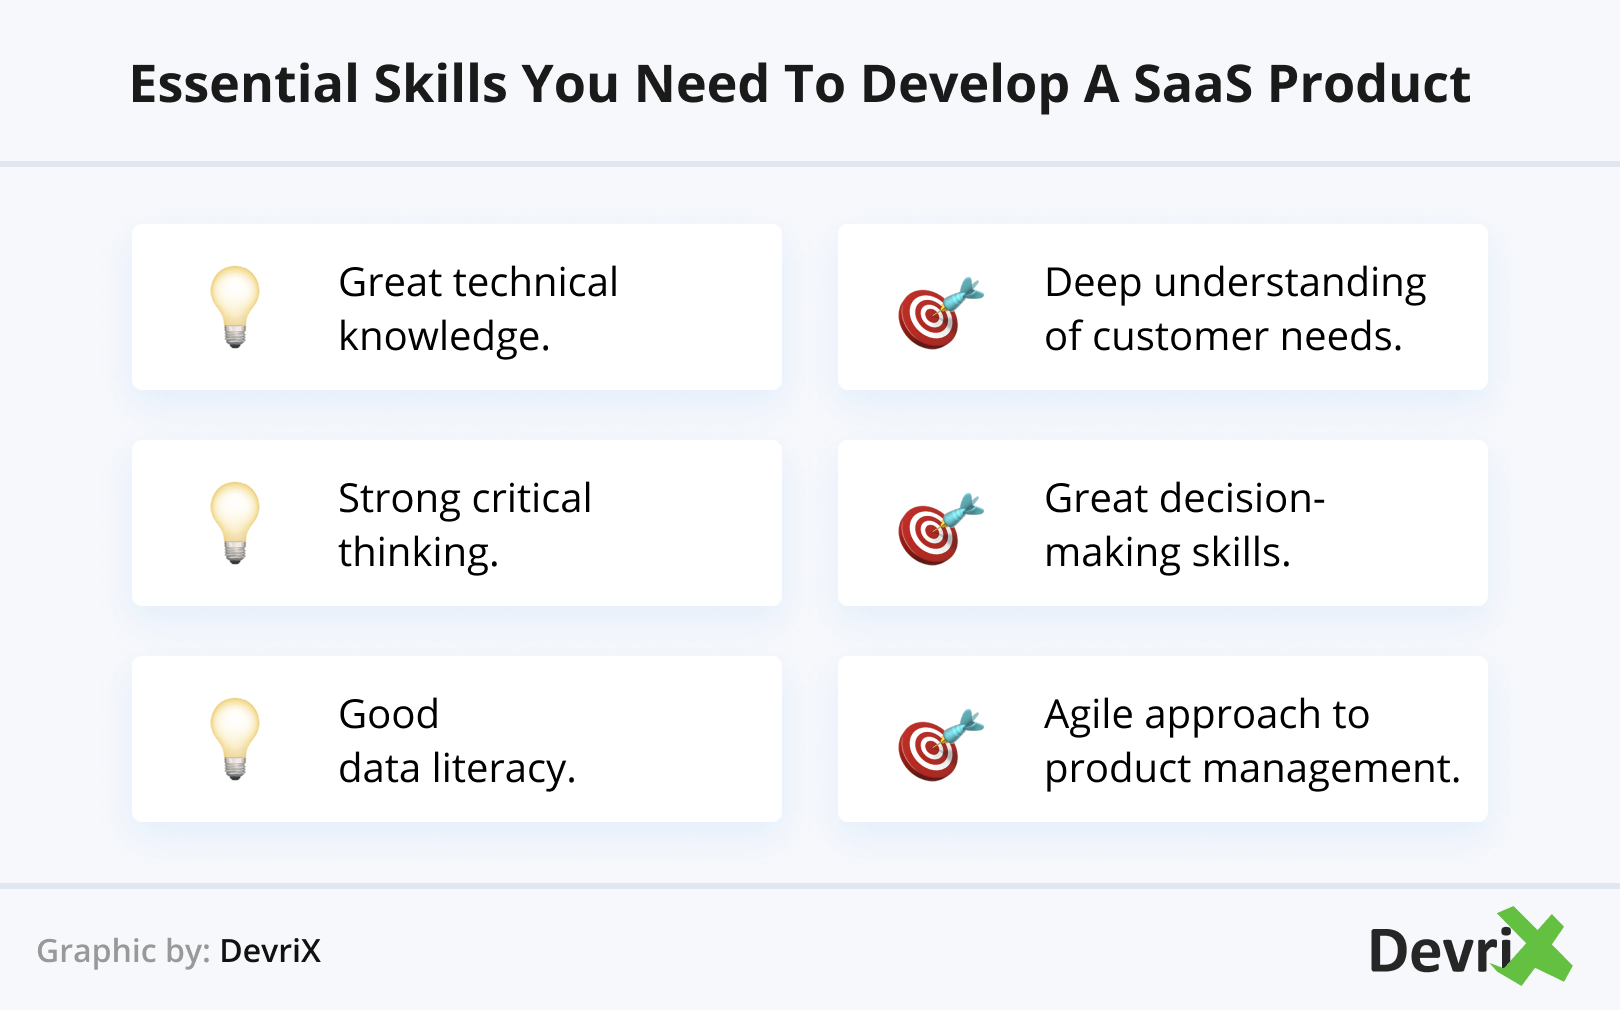 Essential Skills You Need to Develop a SaaS Product